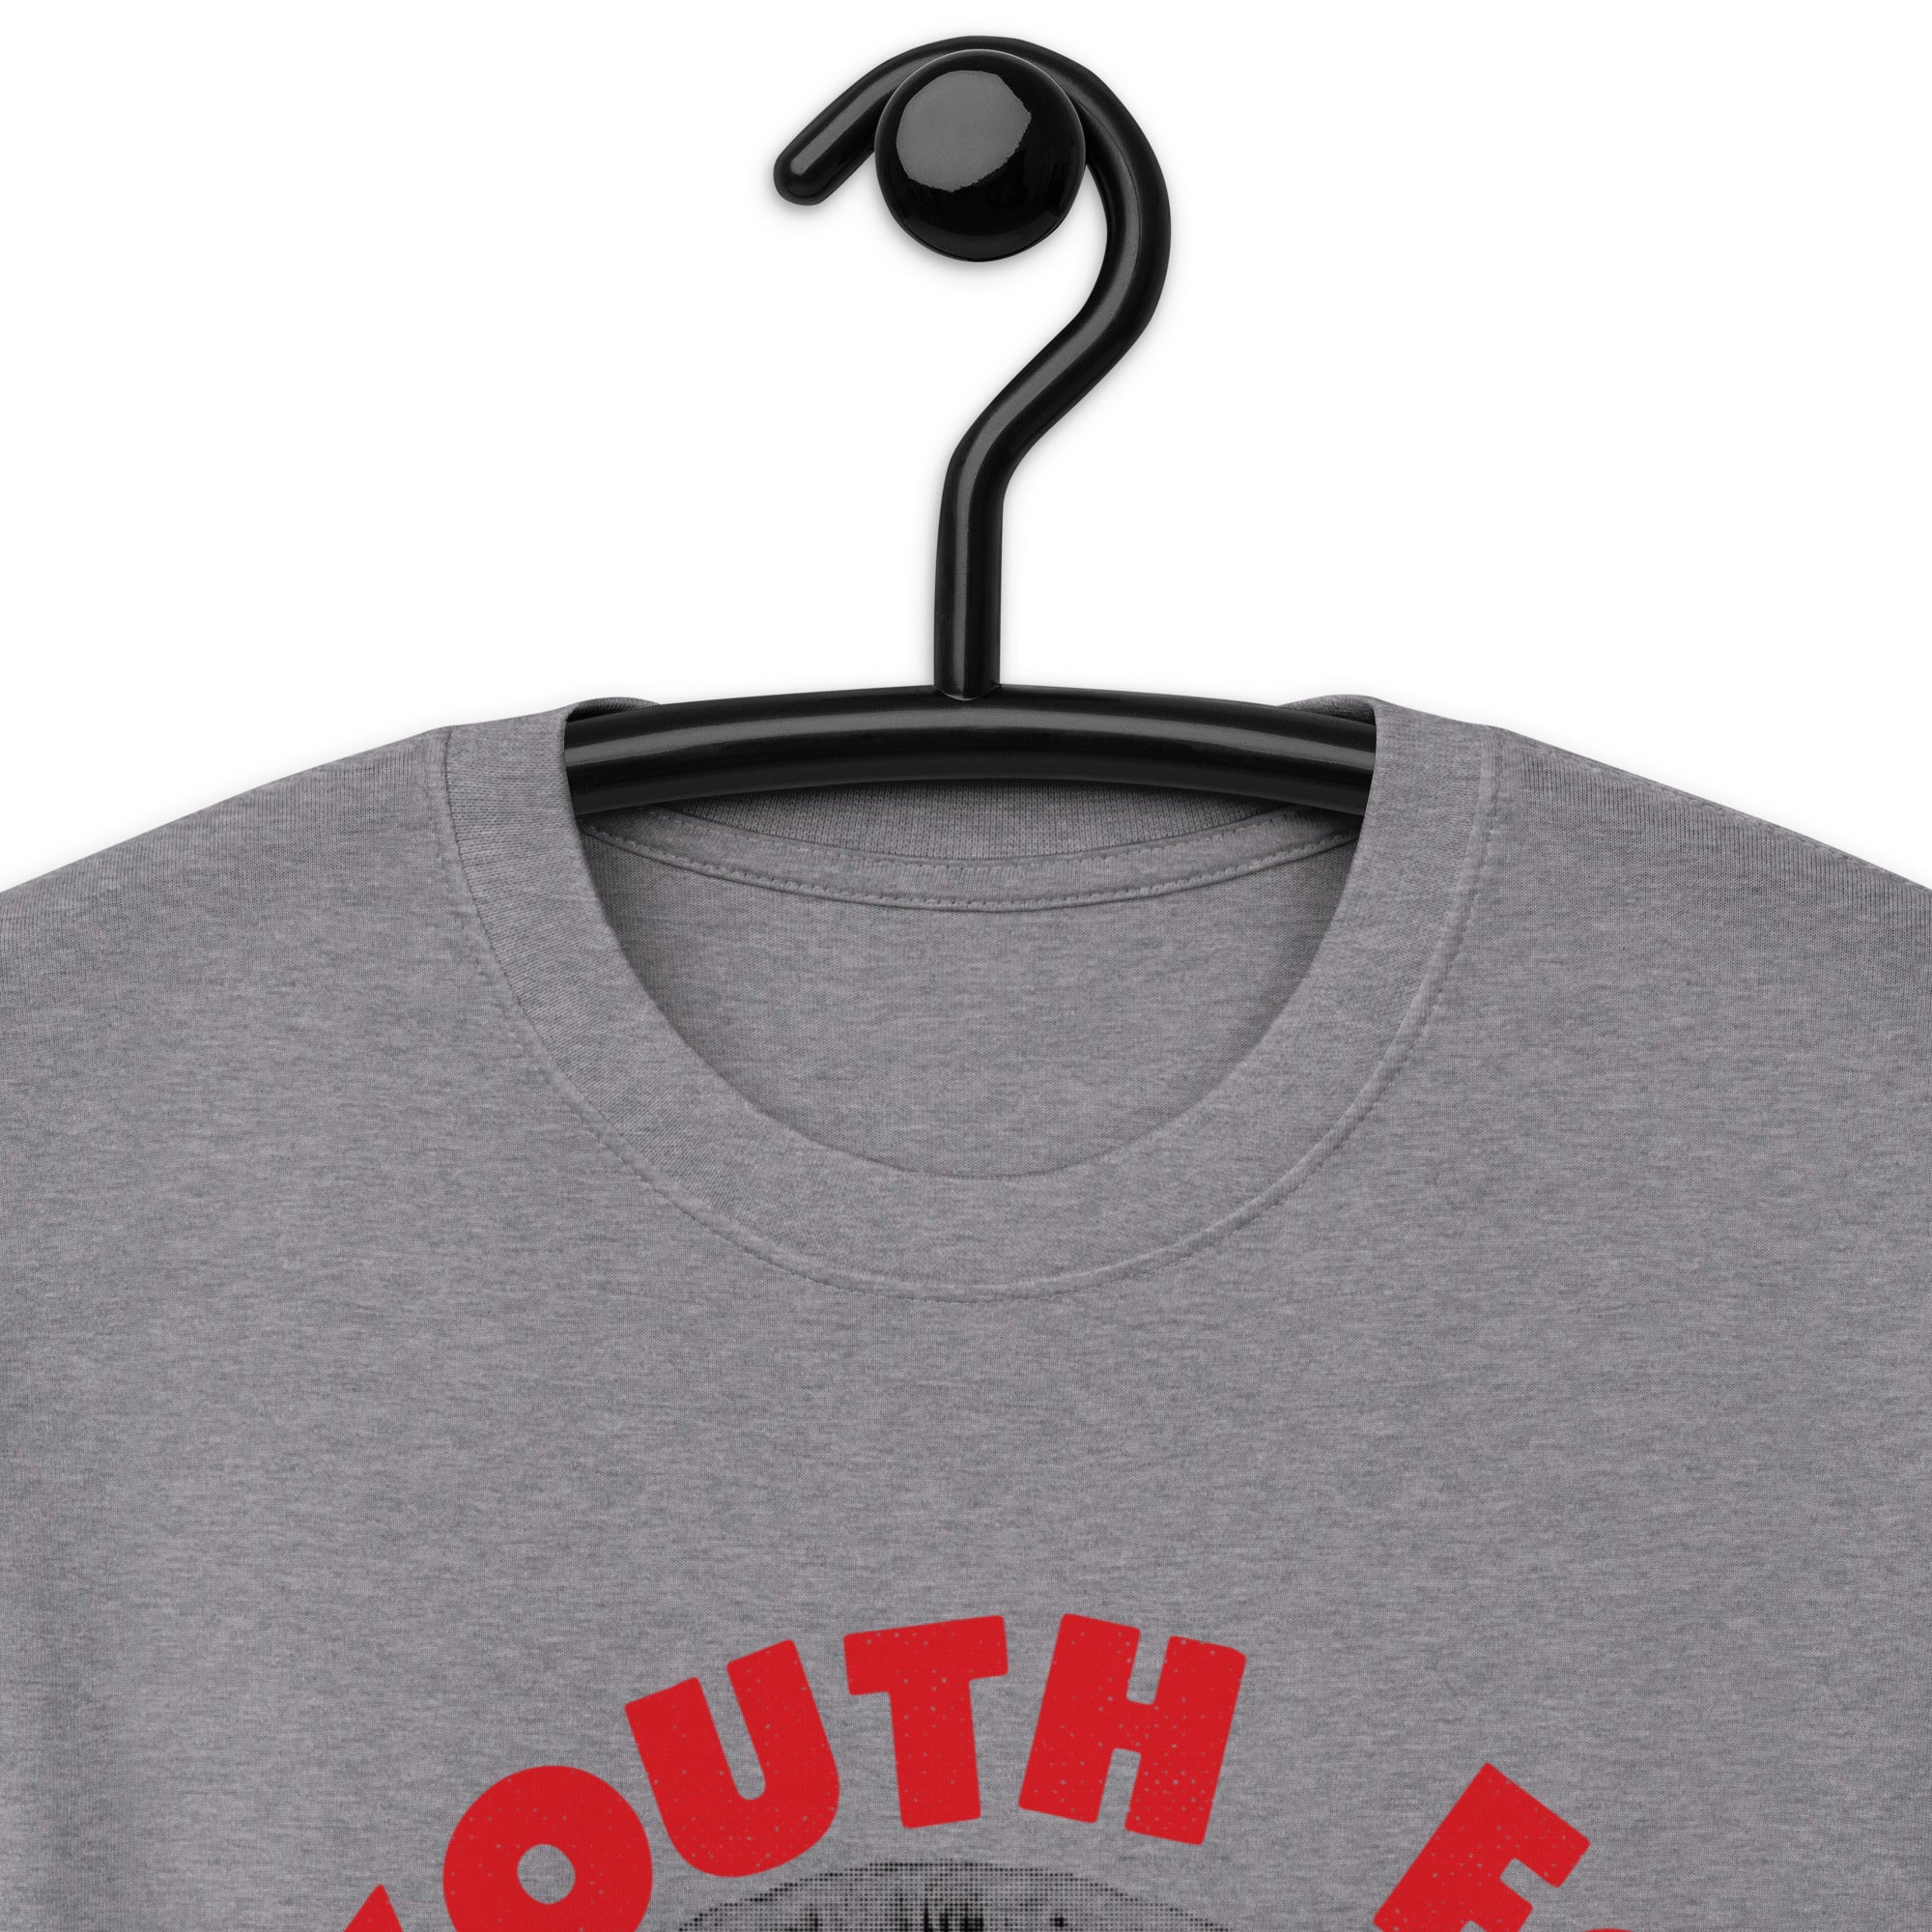 Youth For Kennedy Retro Campaign Heavyweight T-Shirt